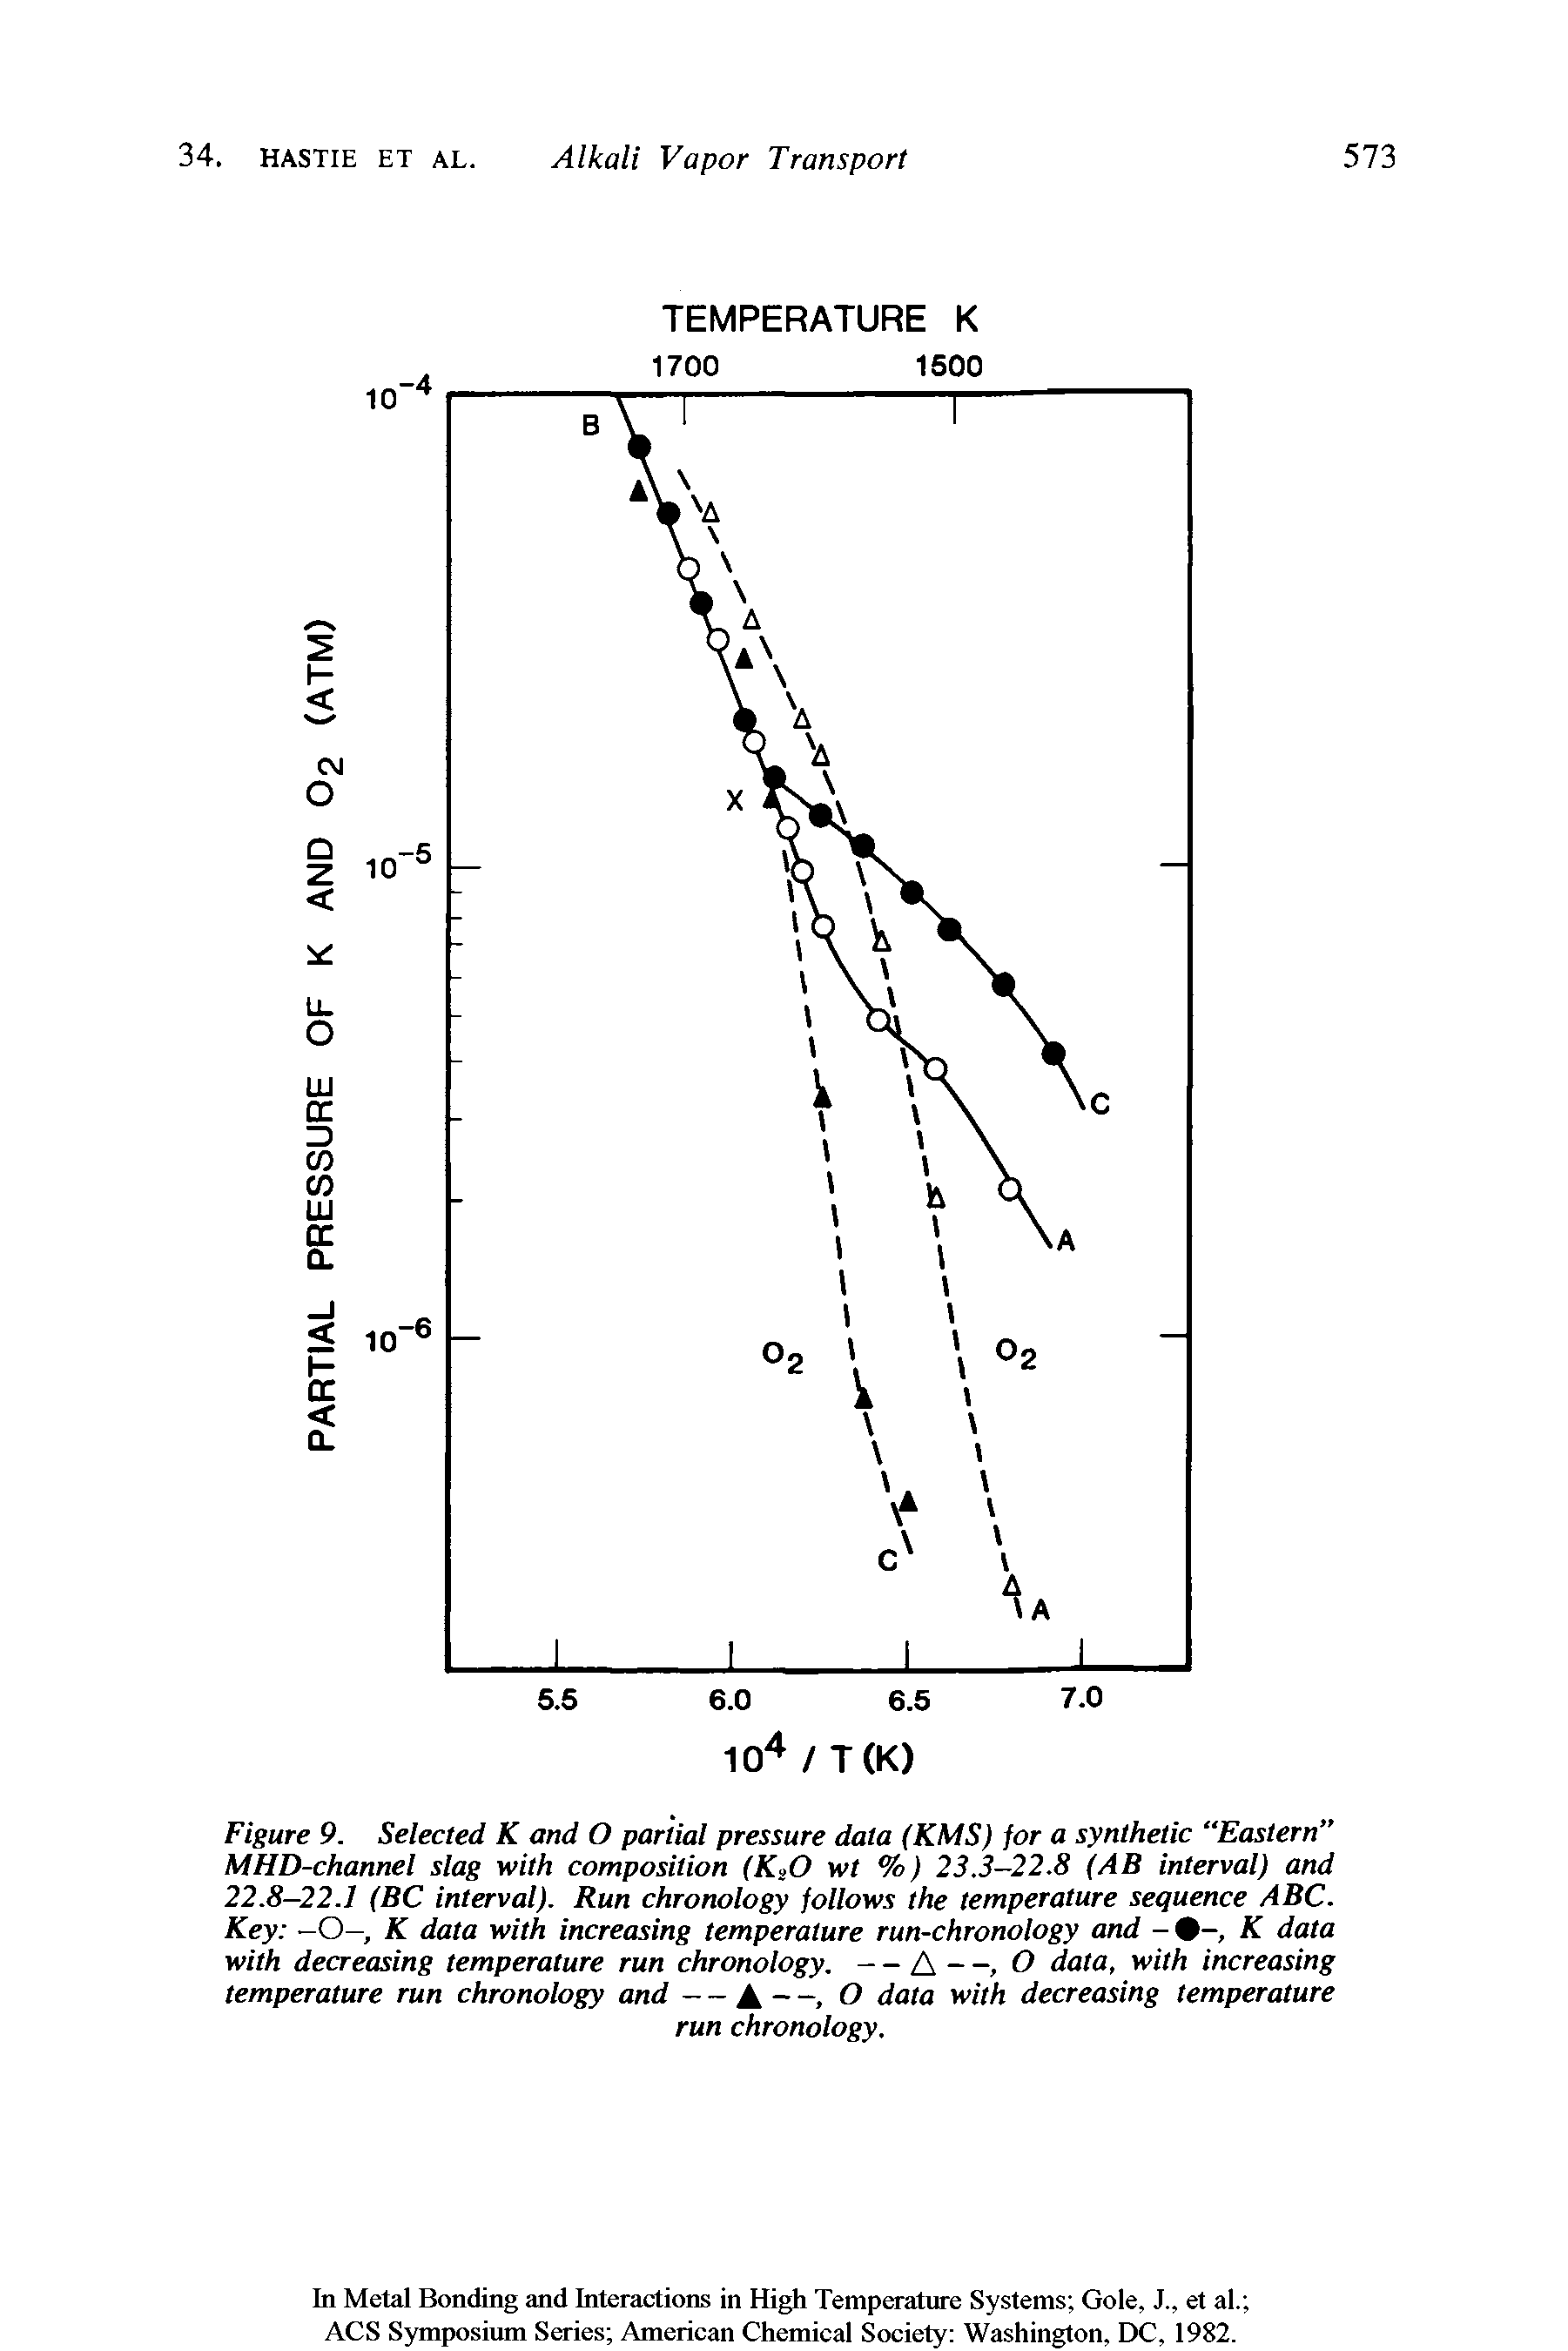 Figure 9. Selected K and O partial pressure data (KMS) for a synthetic Eastern MHD-channel slag with composition (K O wt %) 23.3—22.8 (AB interval) and 22.8—22.1 (BC interval). Run chronology follows the temperature sequence ABC. Key —O—, K data with increasing temperature run-chronology and - K data with decreasing temperature run chronology. — A —, O data, with increasing temperature run chronology and — A —, O data with decreasing temperature...